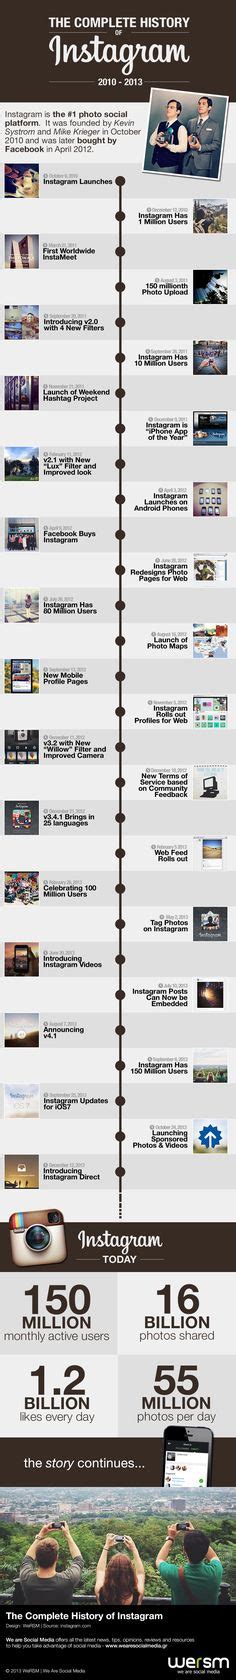 Timeline Of Instagram From 2010 To Present Infographic Infographic